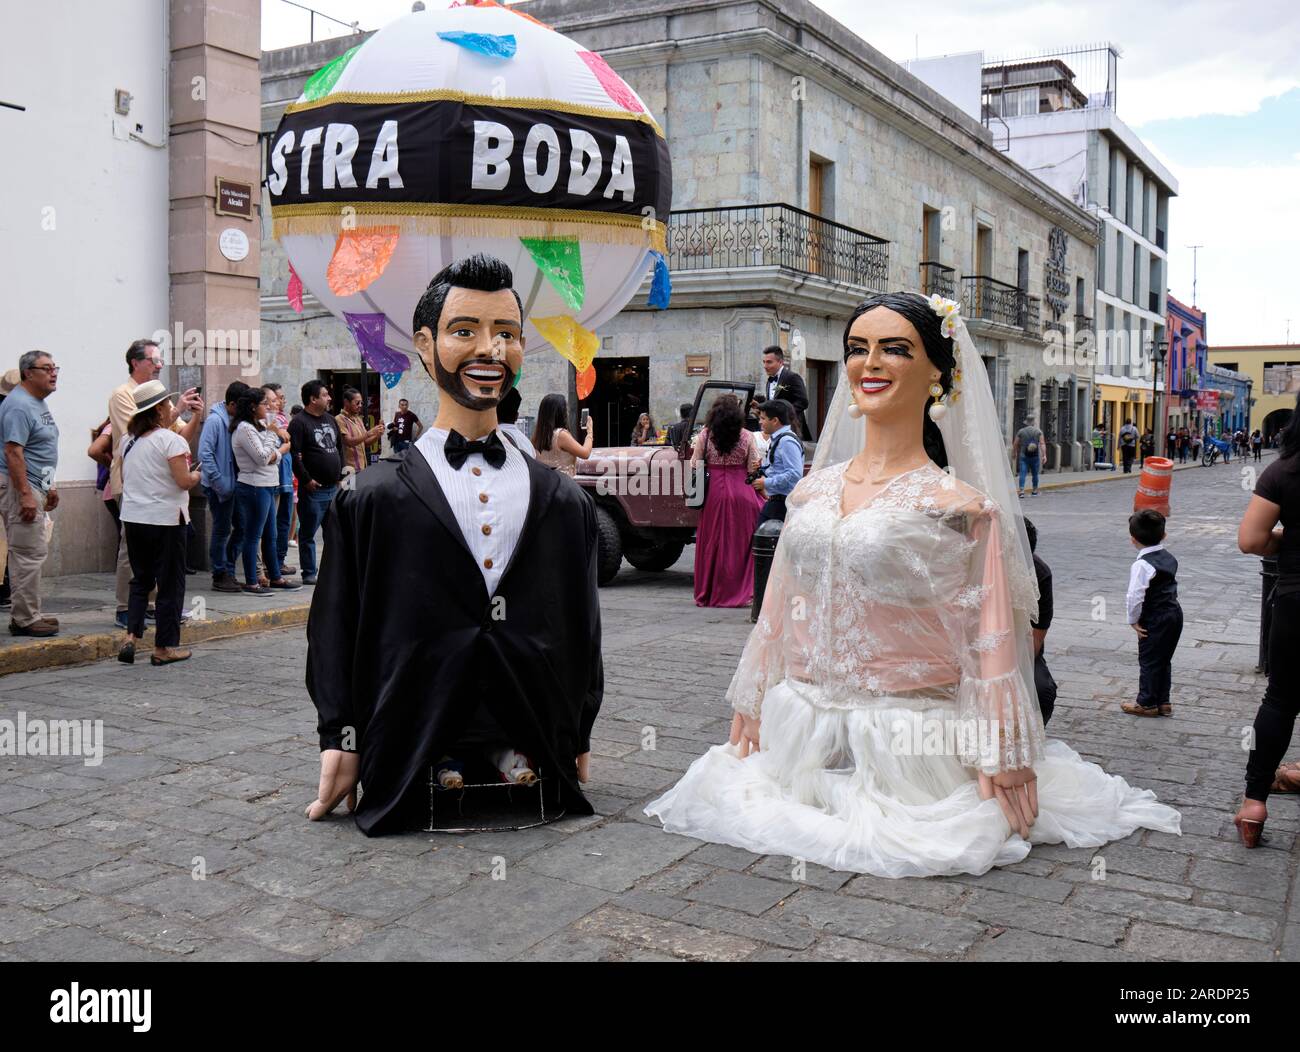 Giant puppet of the Bride and groom with large ball at end of Traditional wedding parade (Calenda de Bodas) on the streets of Oaxaca. Stock Photo